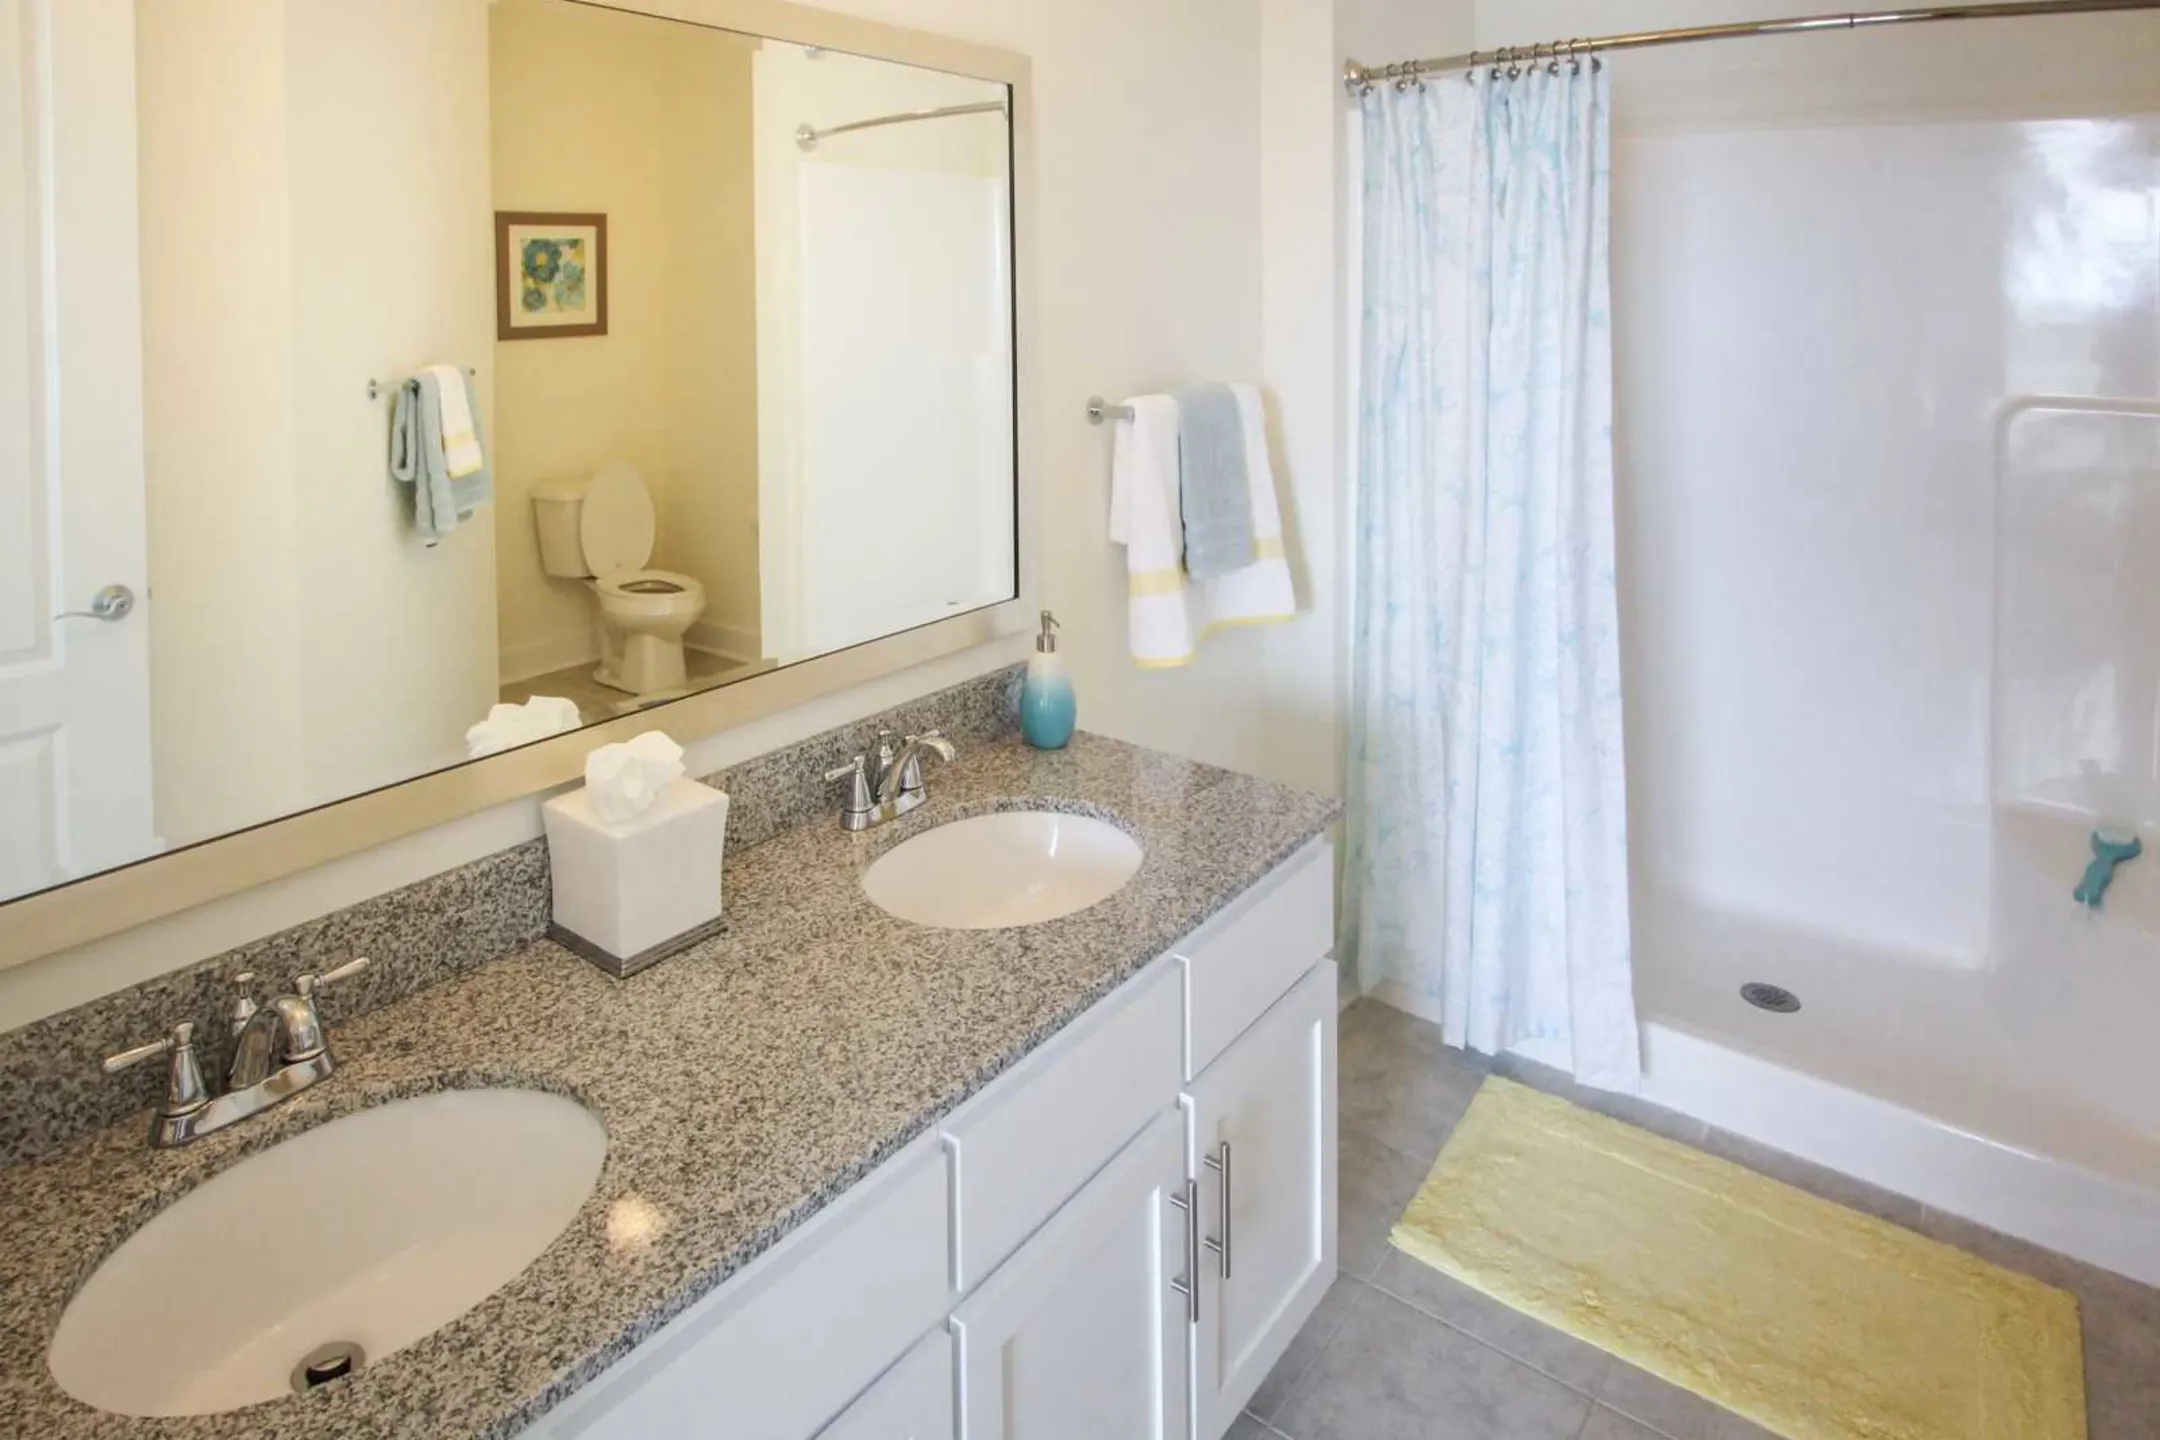 Bathroom - The Residences at Lexington Hills - Cohoes, NY